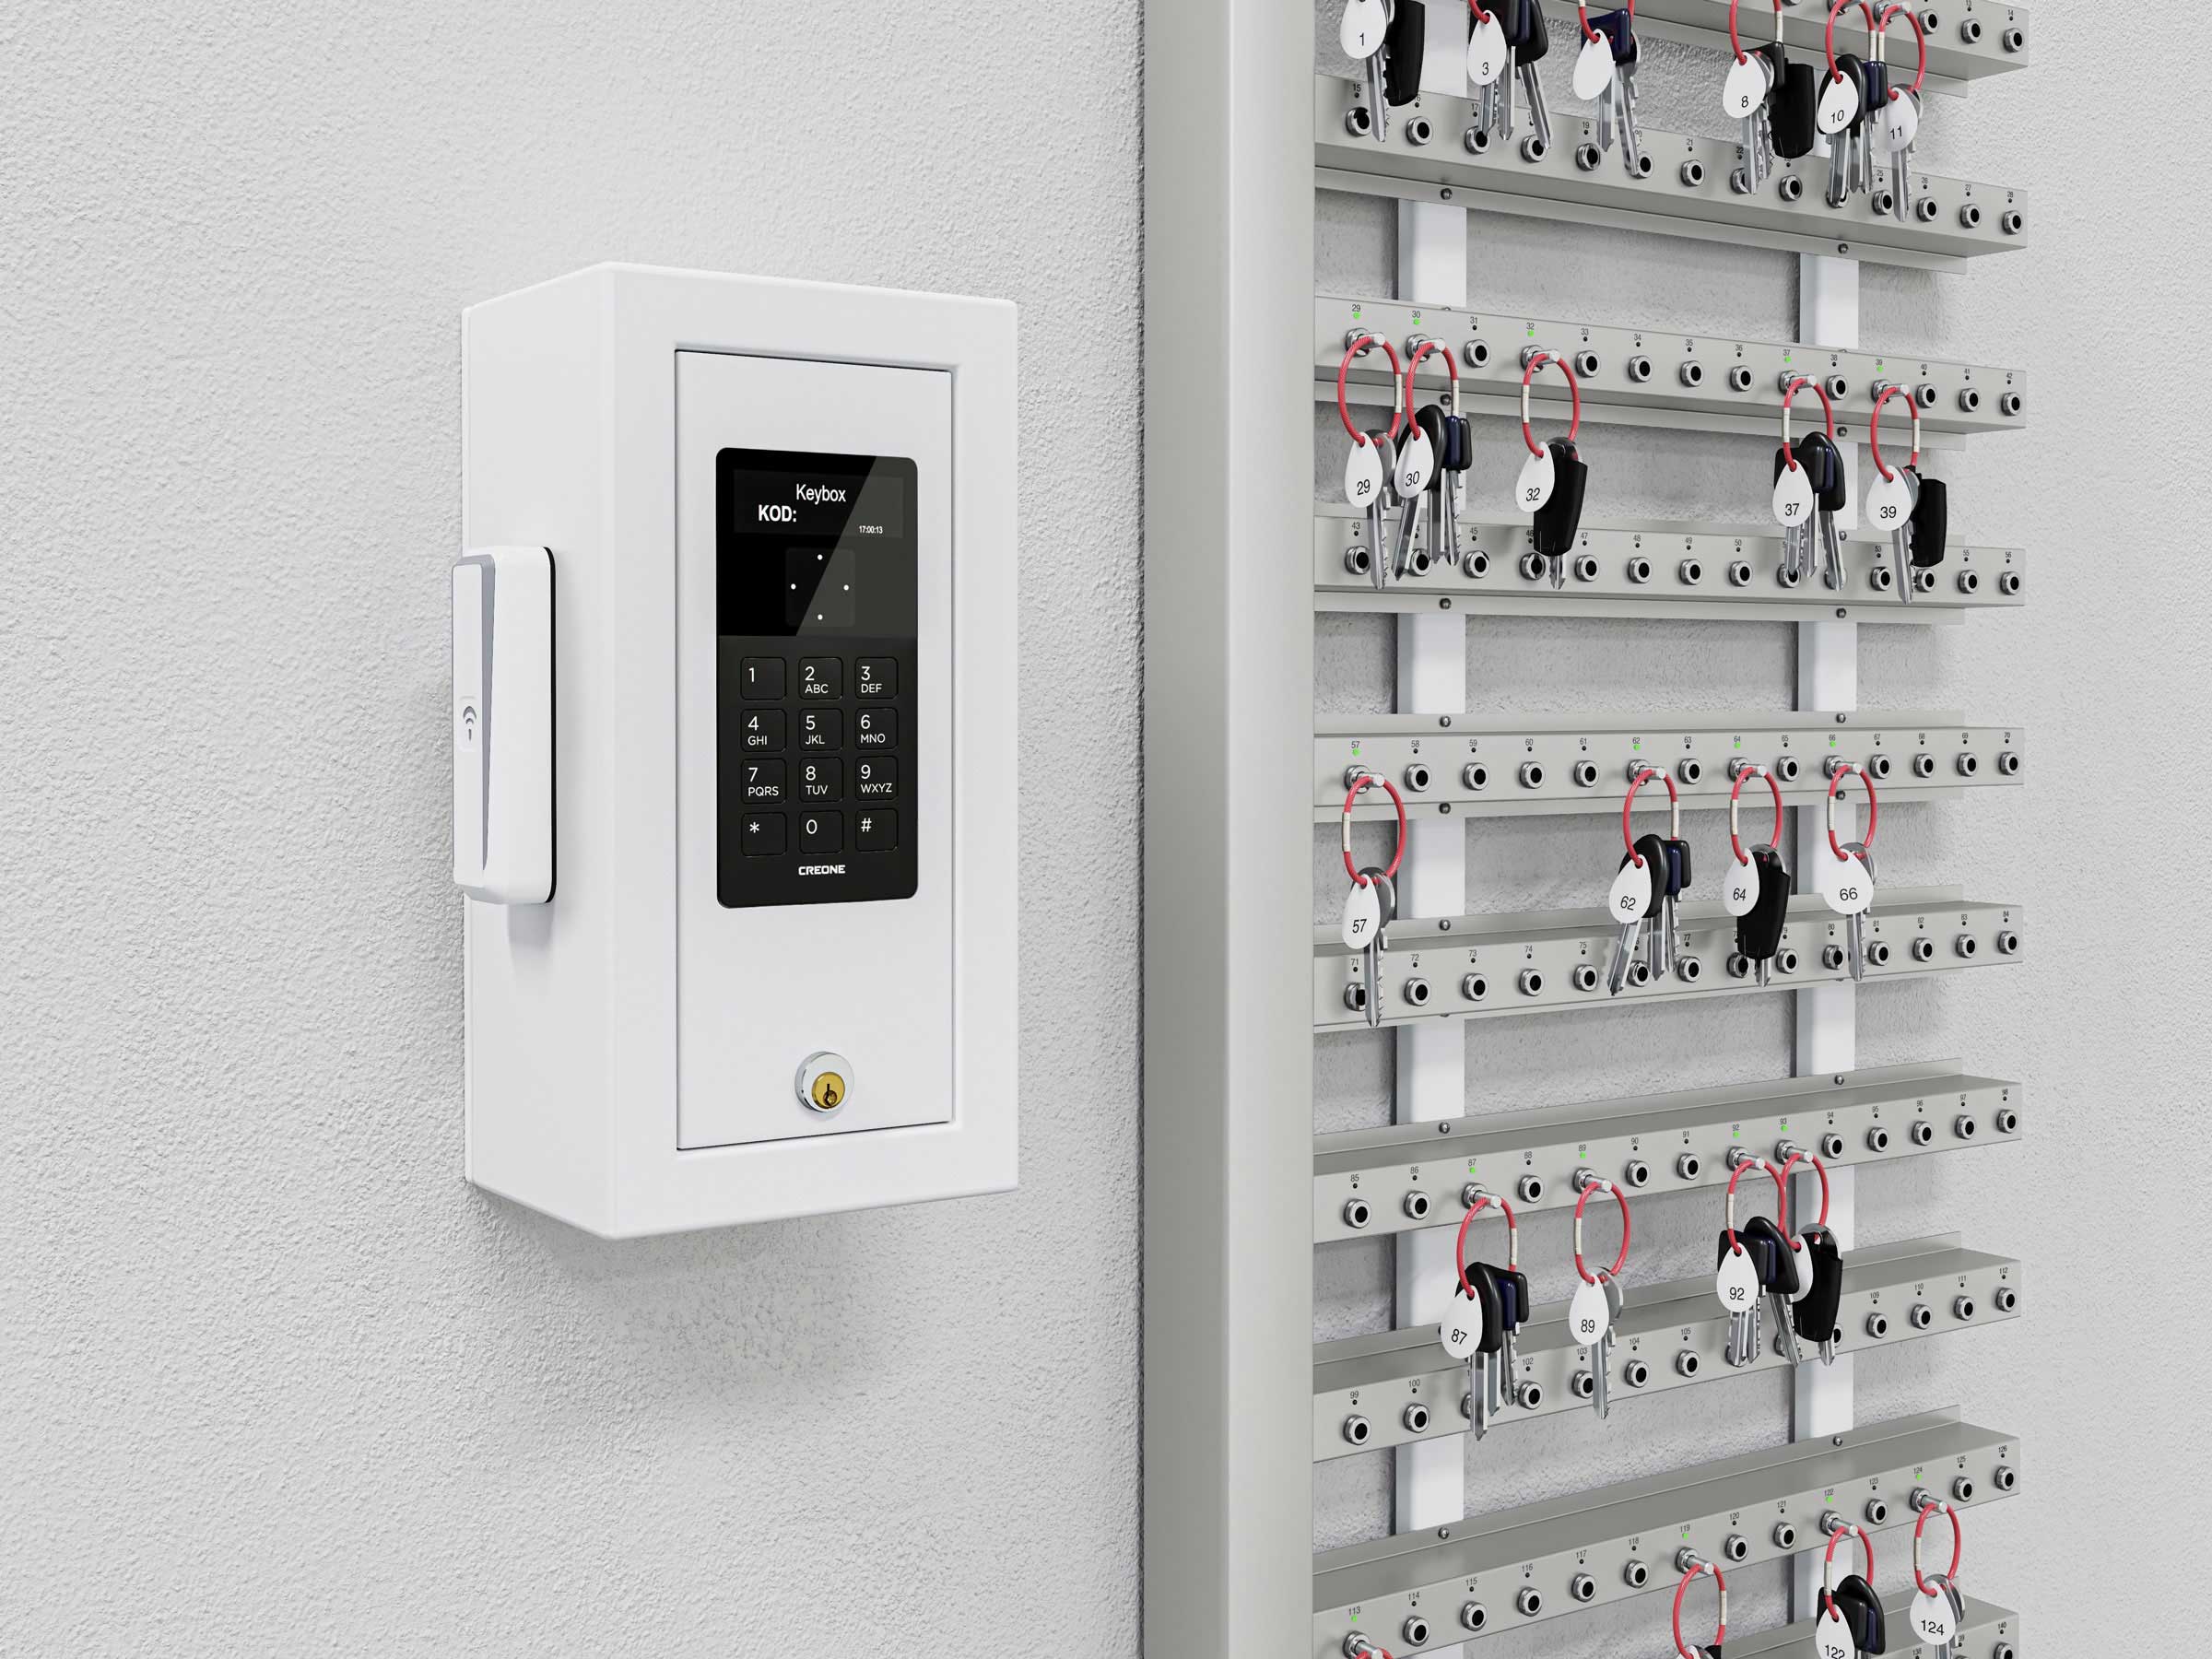 Intelligent key strips with control box mounted on the wall for key management.